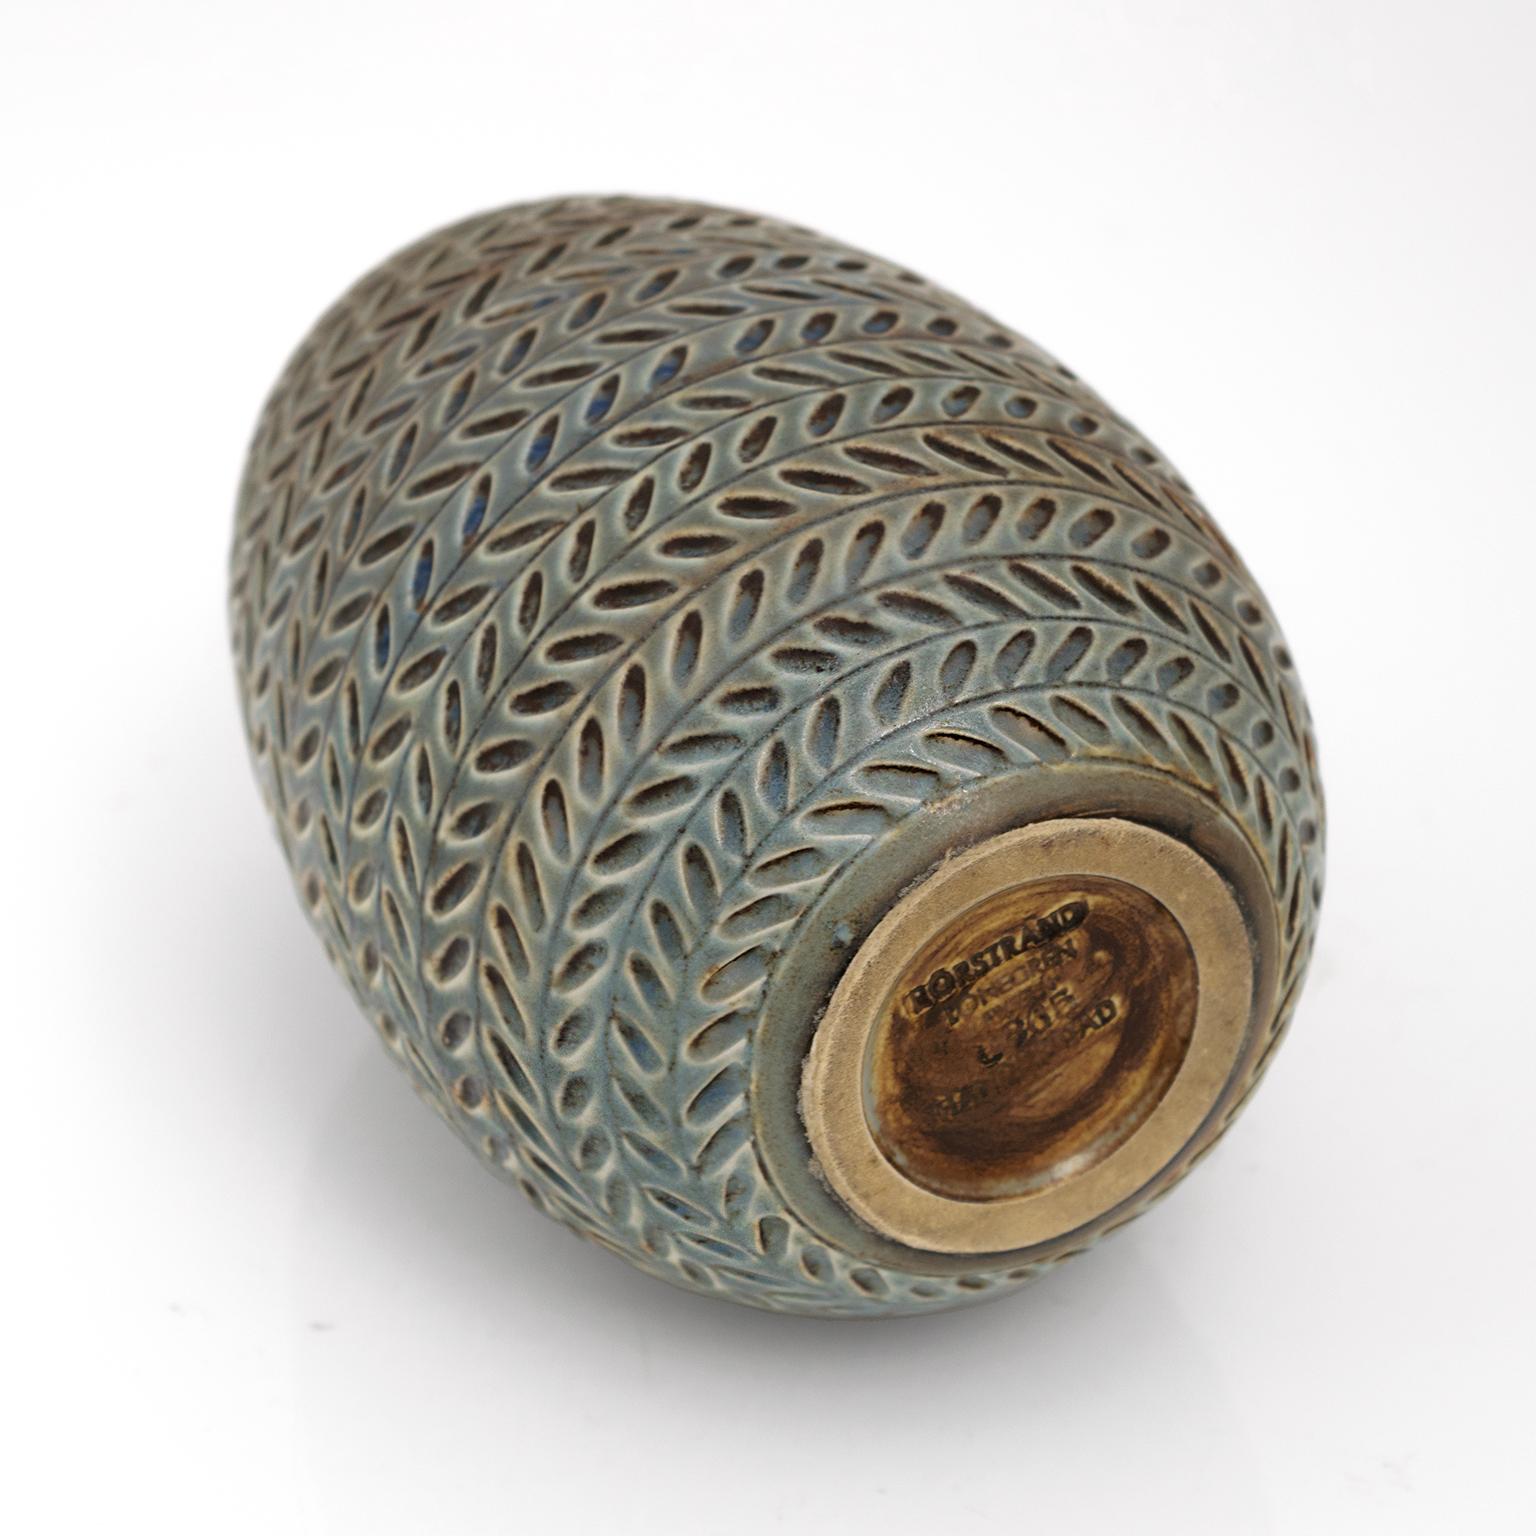 Gertrud Lonegren Textured Color Glazed Ceramic Vase, Rorstrand, 1940's In Good Condition For Sale In New York, NY